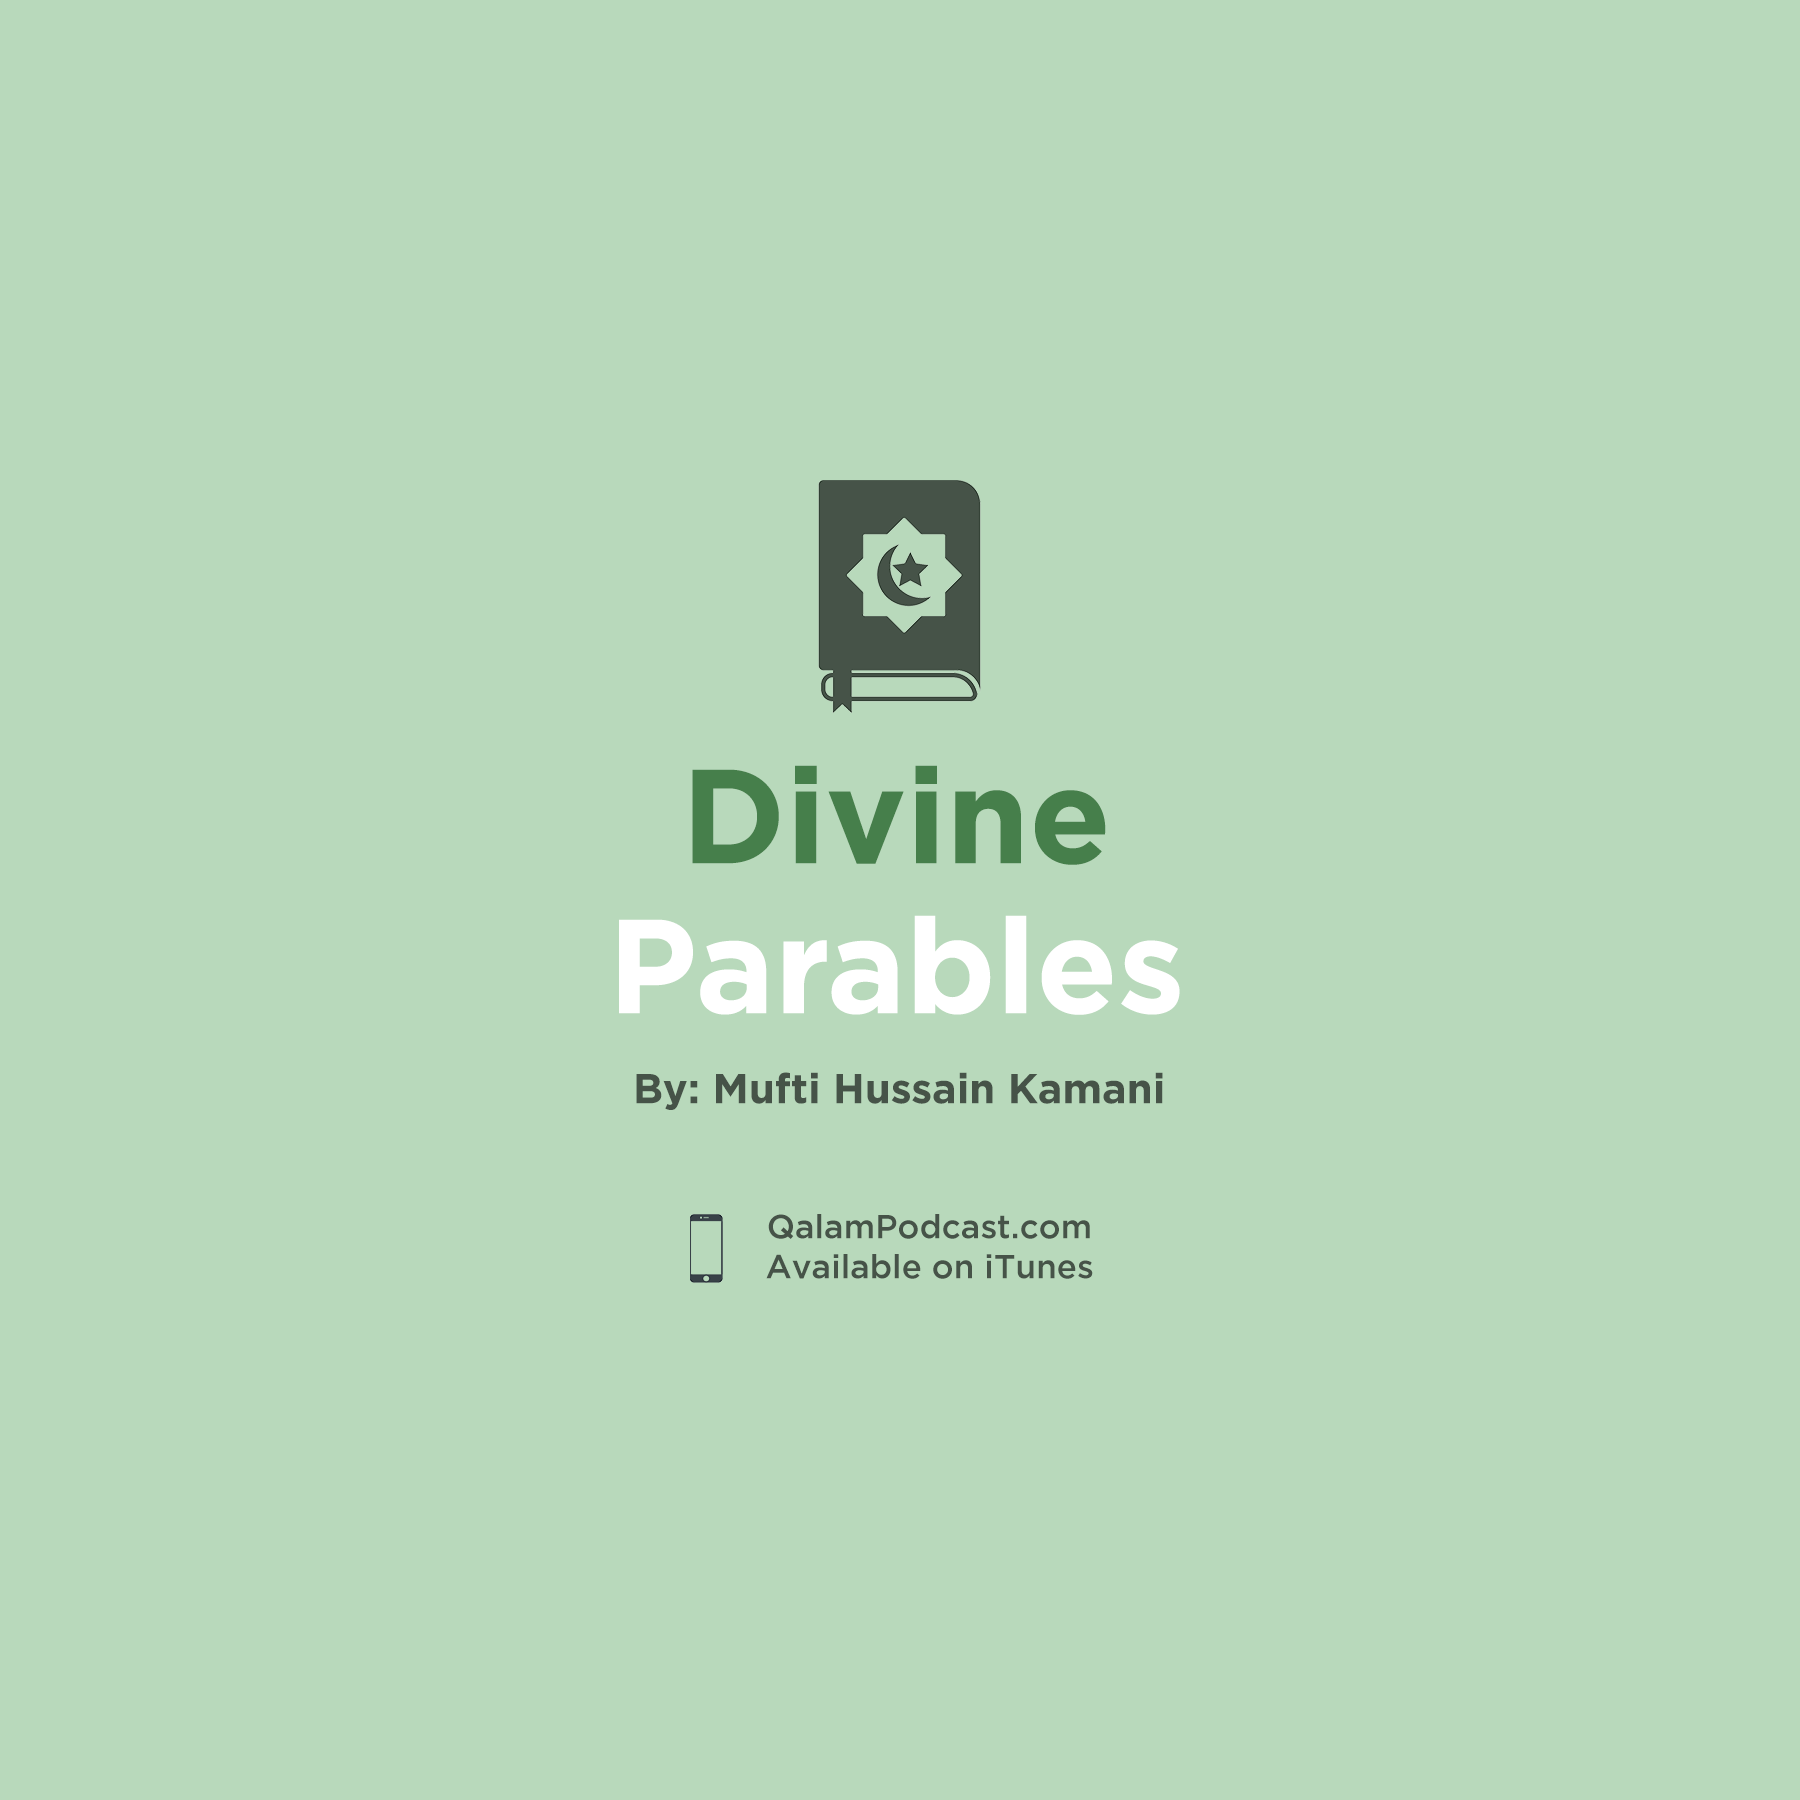 Divine Parables: EP26 – You Reap What You Sow